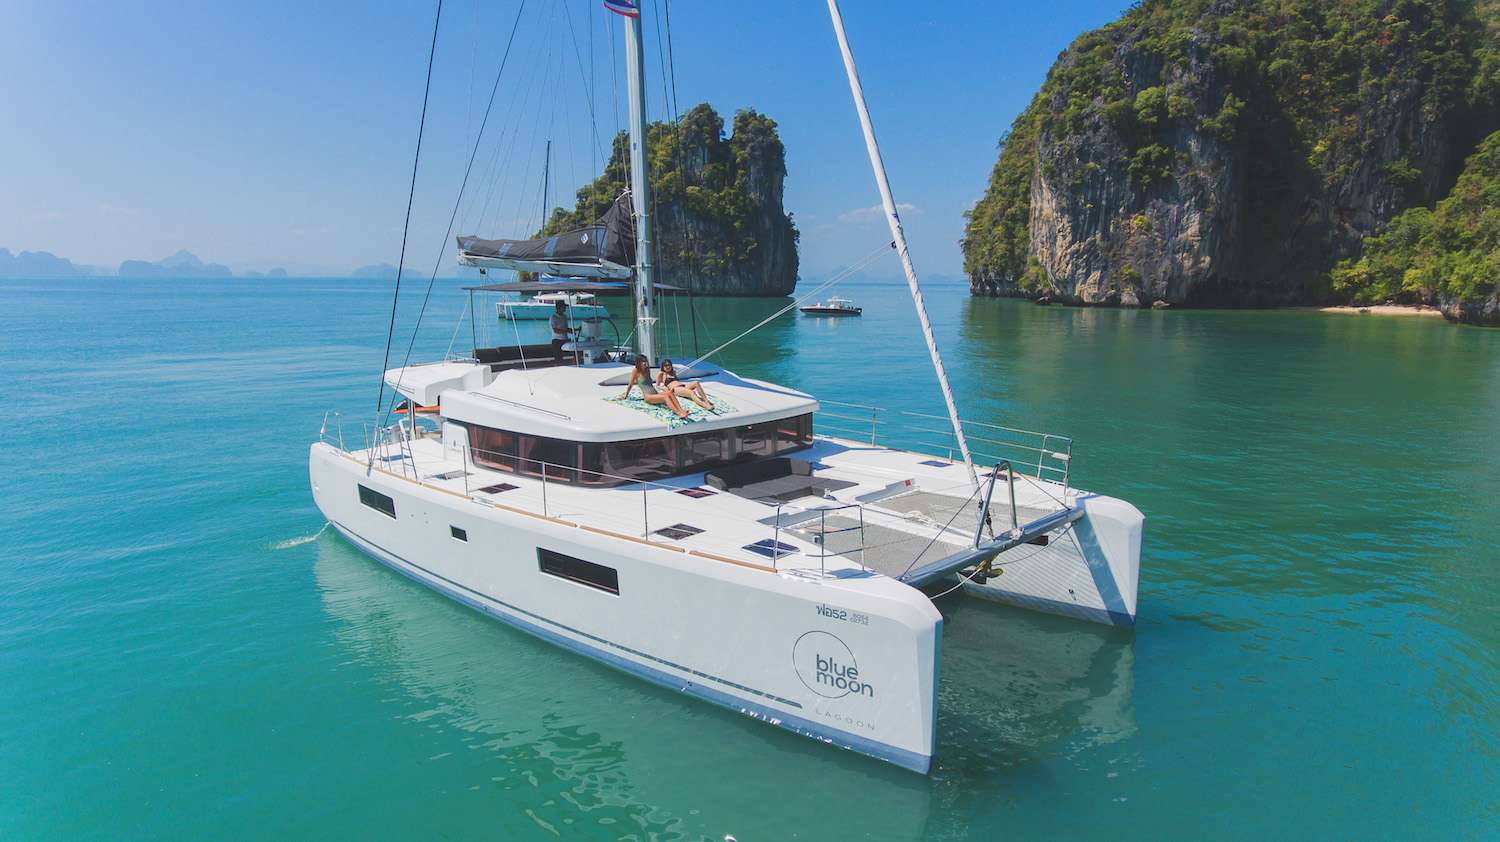 blue moon - Luxury yacht charter Thailand & Boat hire in Indian Ocean & SE Asia 2